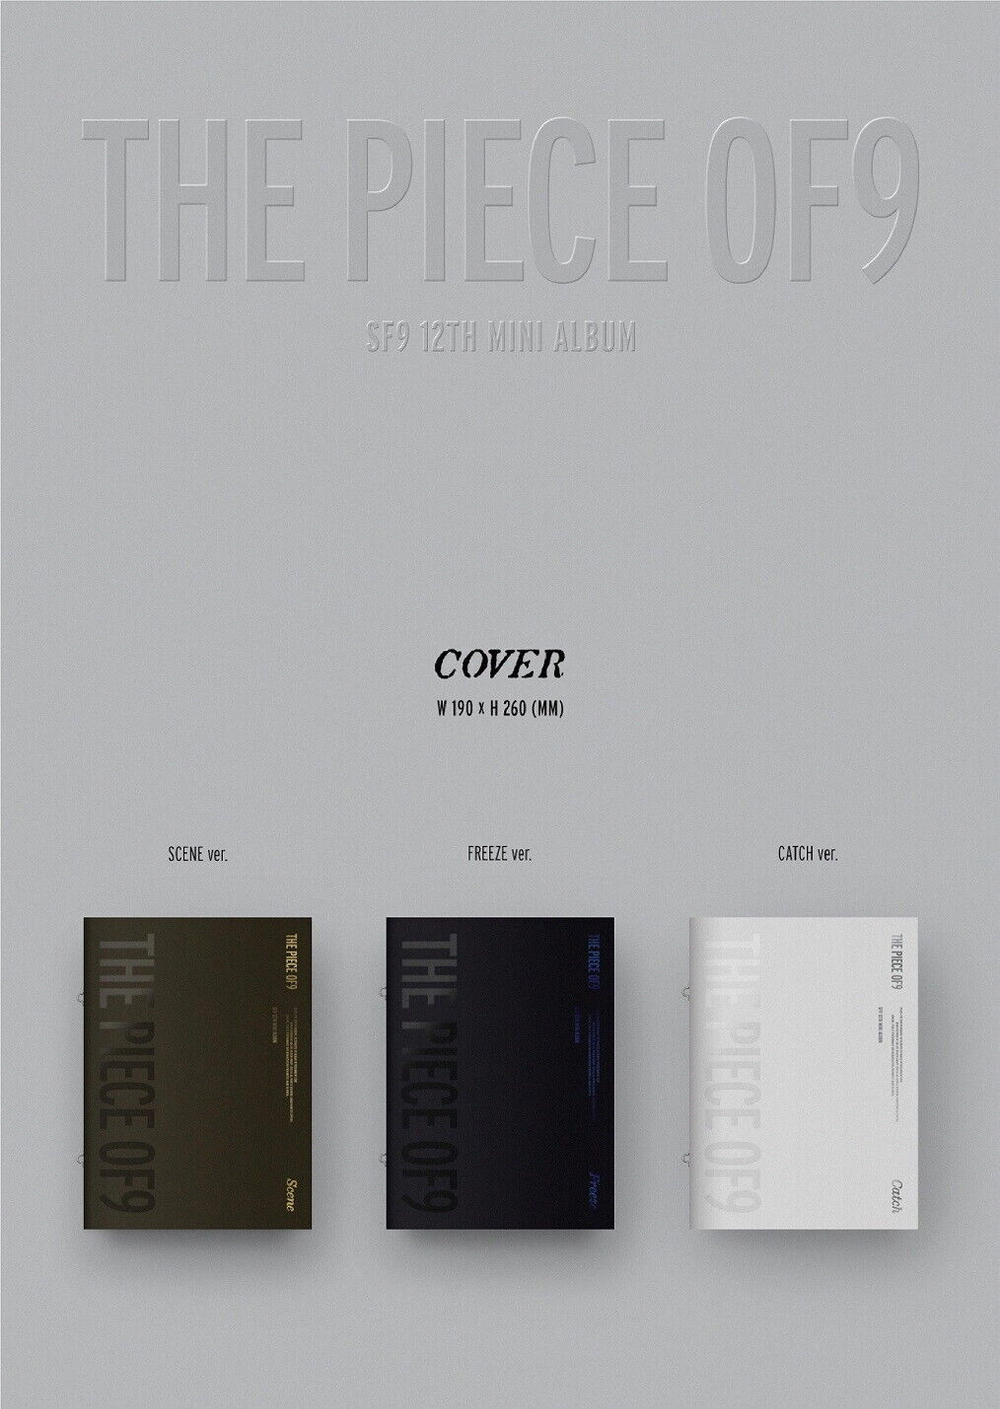 SF9 - THE PIECE OF9